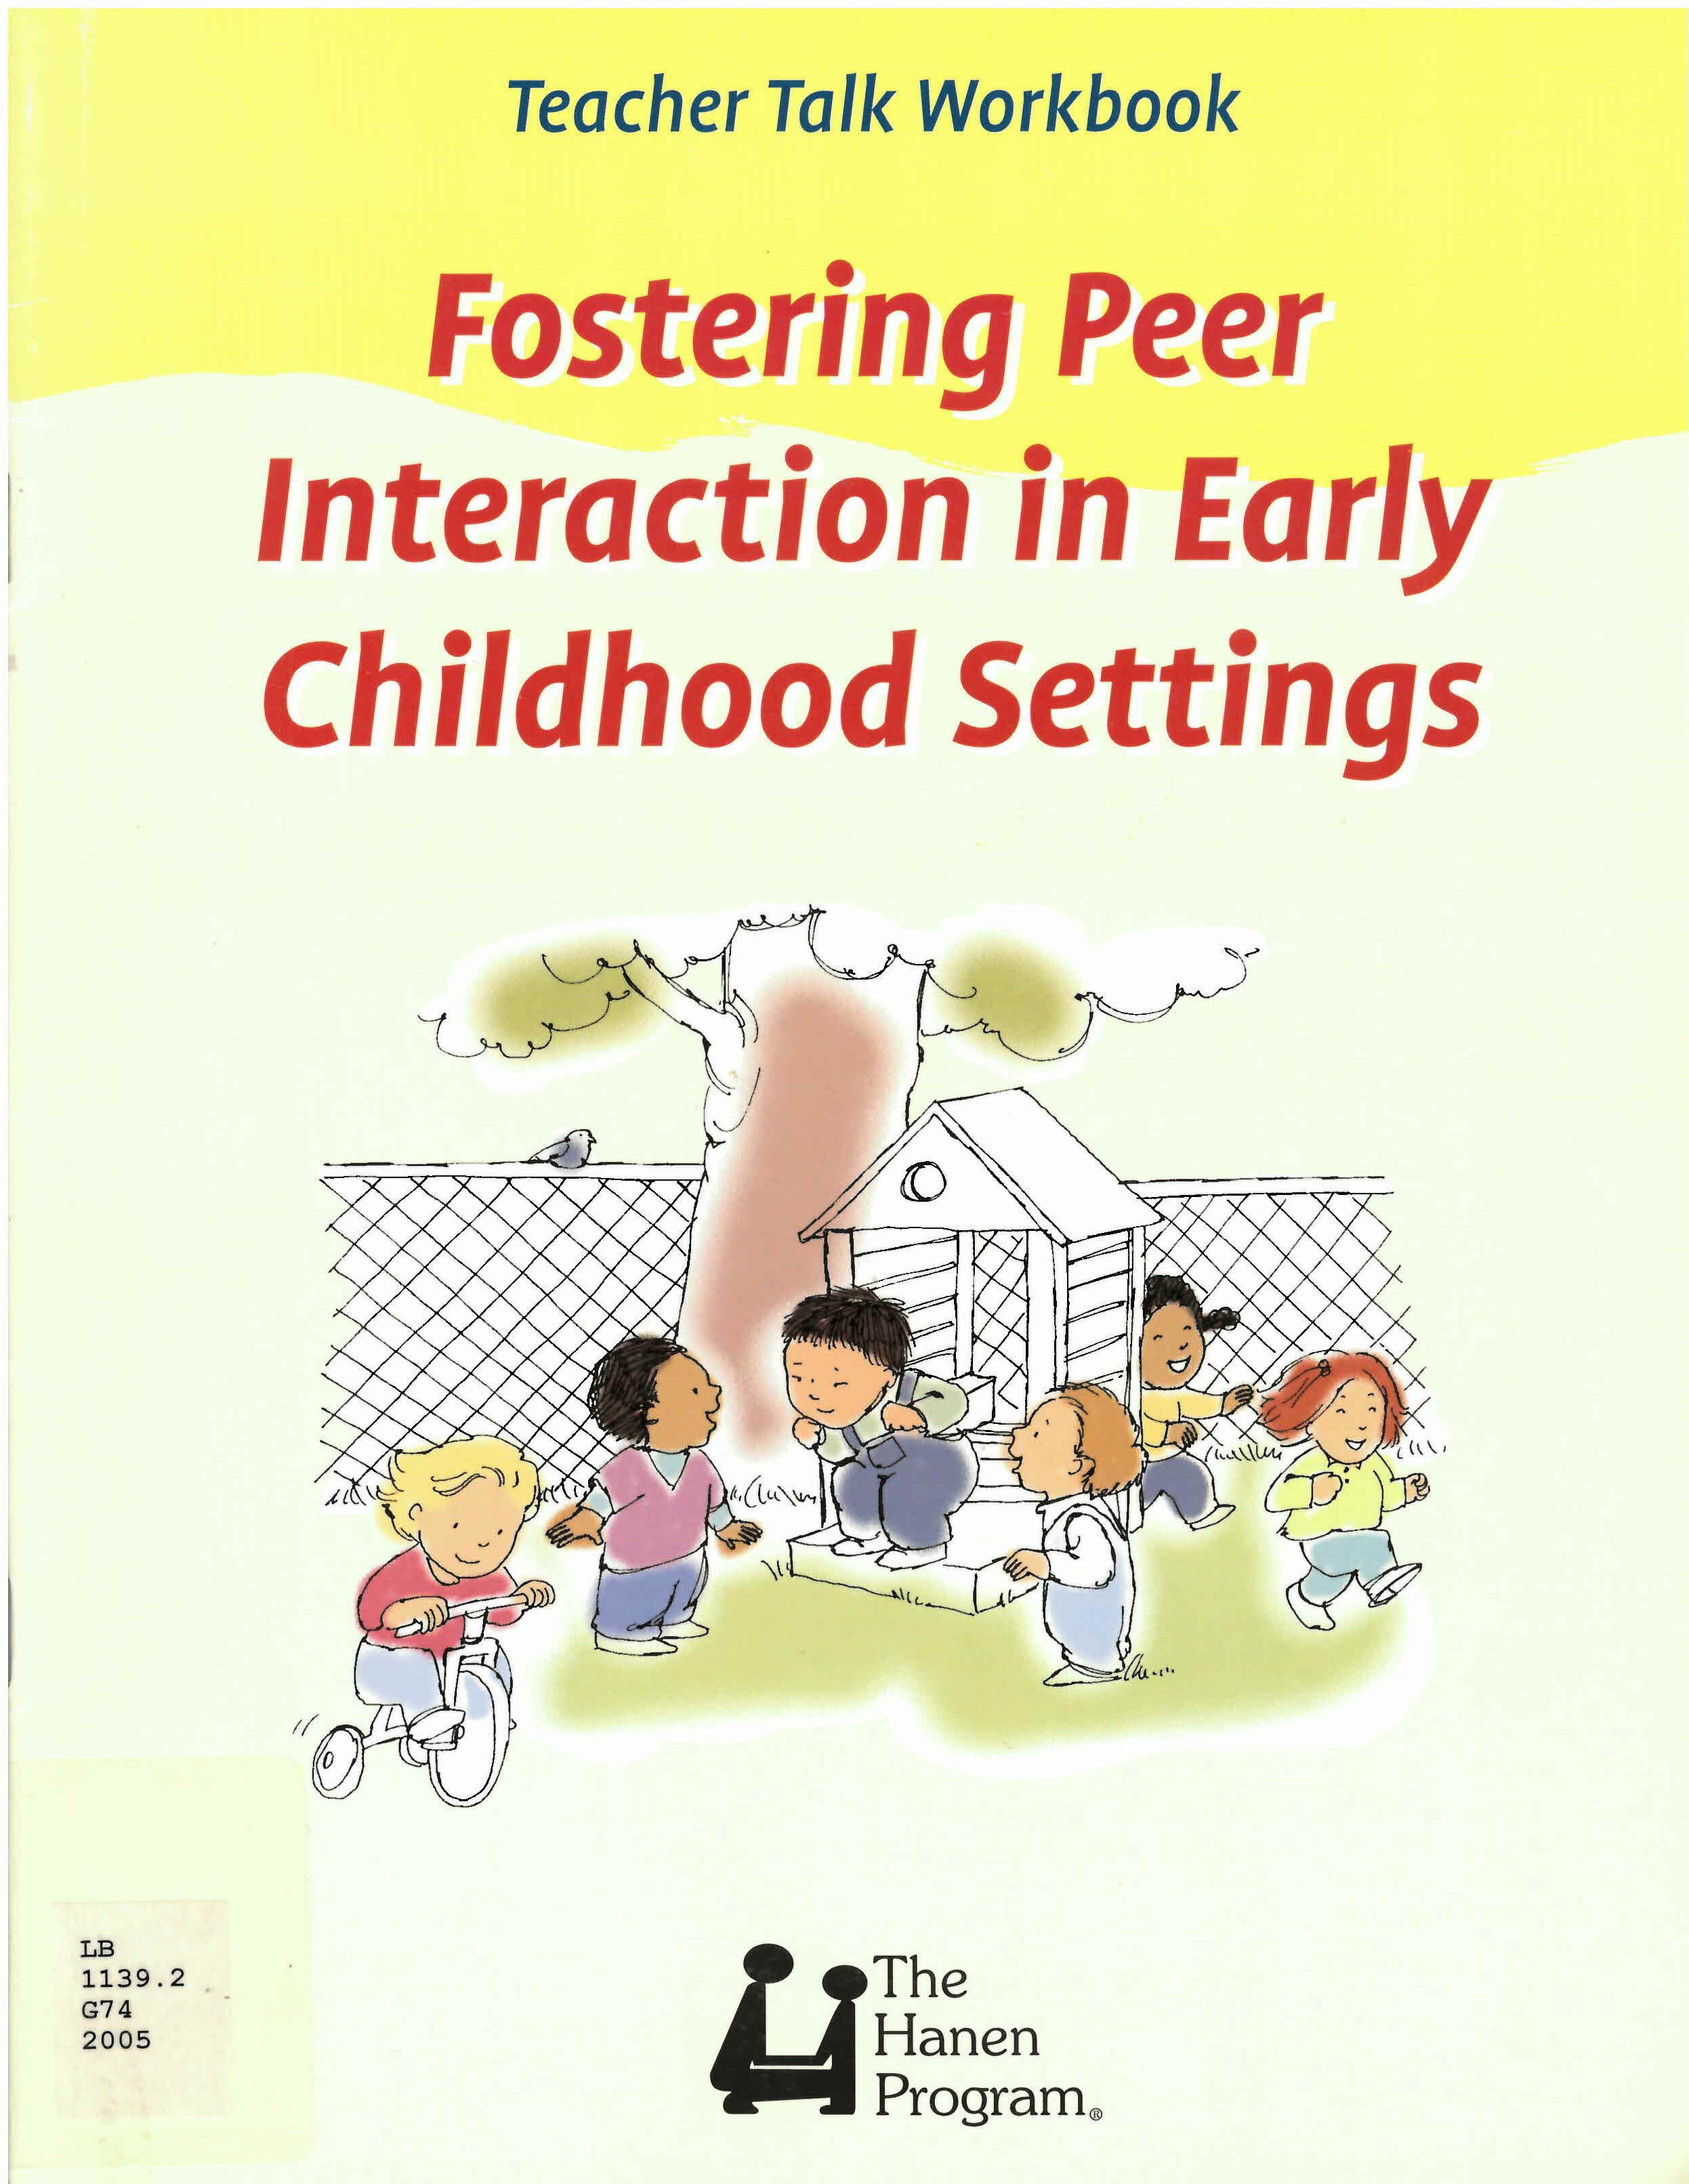 Fostering peer interaction in early childhood settings